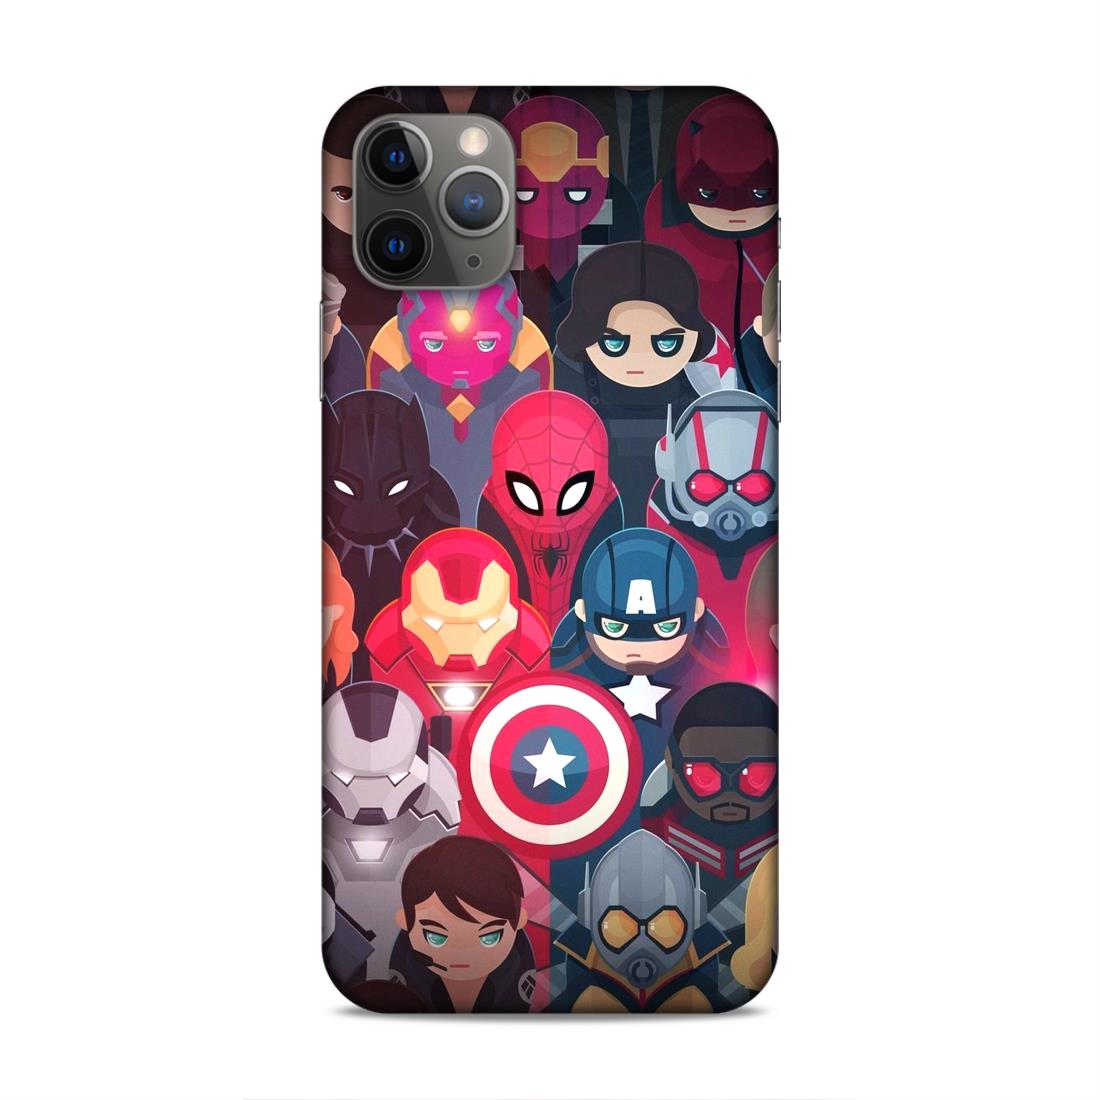 Avenger Heroes Hard Back Case For Apple iPhone 11 Pro Max